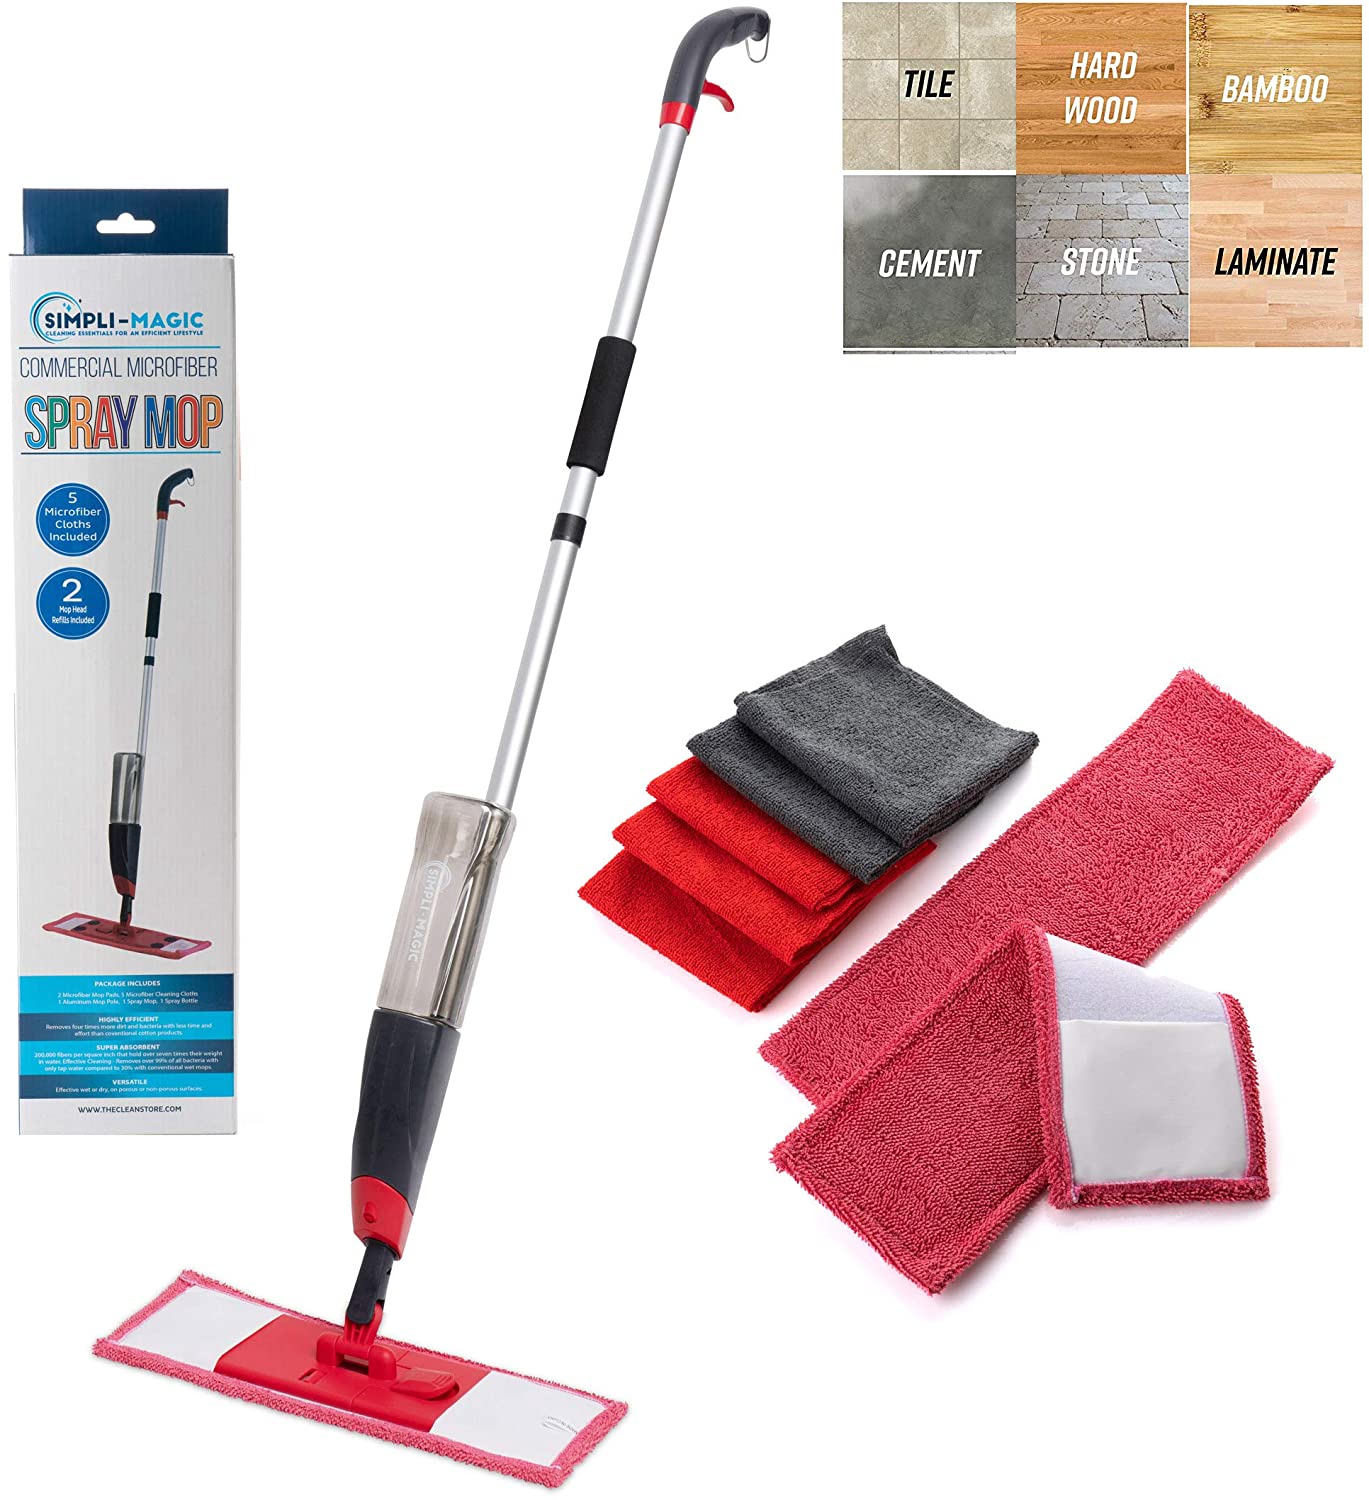 Rubbermaid Reveal Spray Microfiber Floor Mop Cleaning Kit for Laminate &  Hardwood Floors, Spray Mop with Reusable Washable Pads, Commercial Mop 